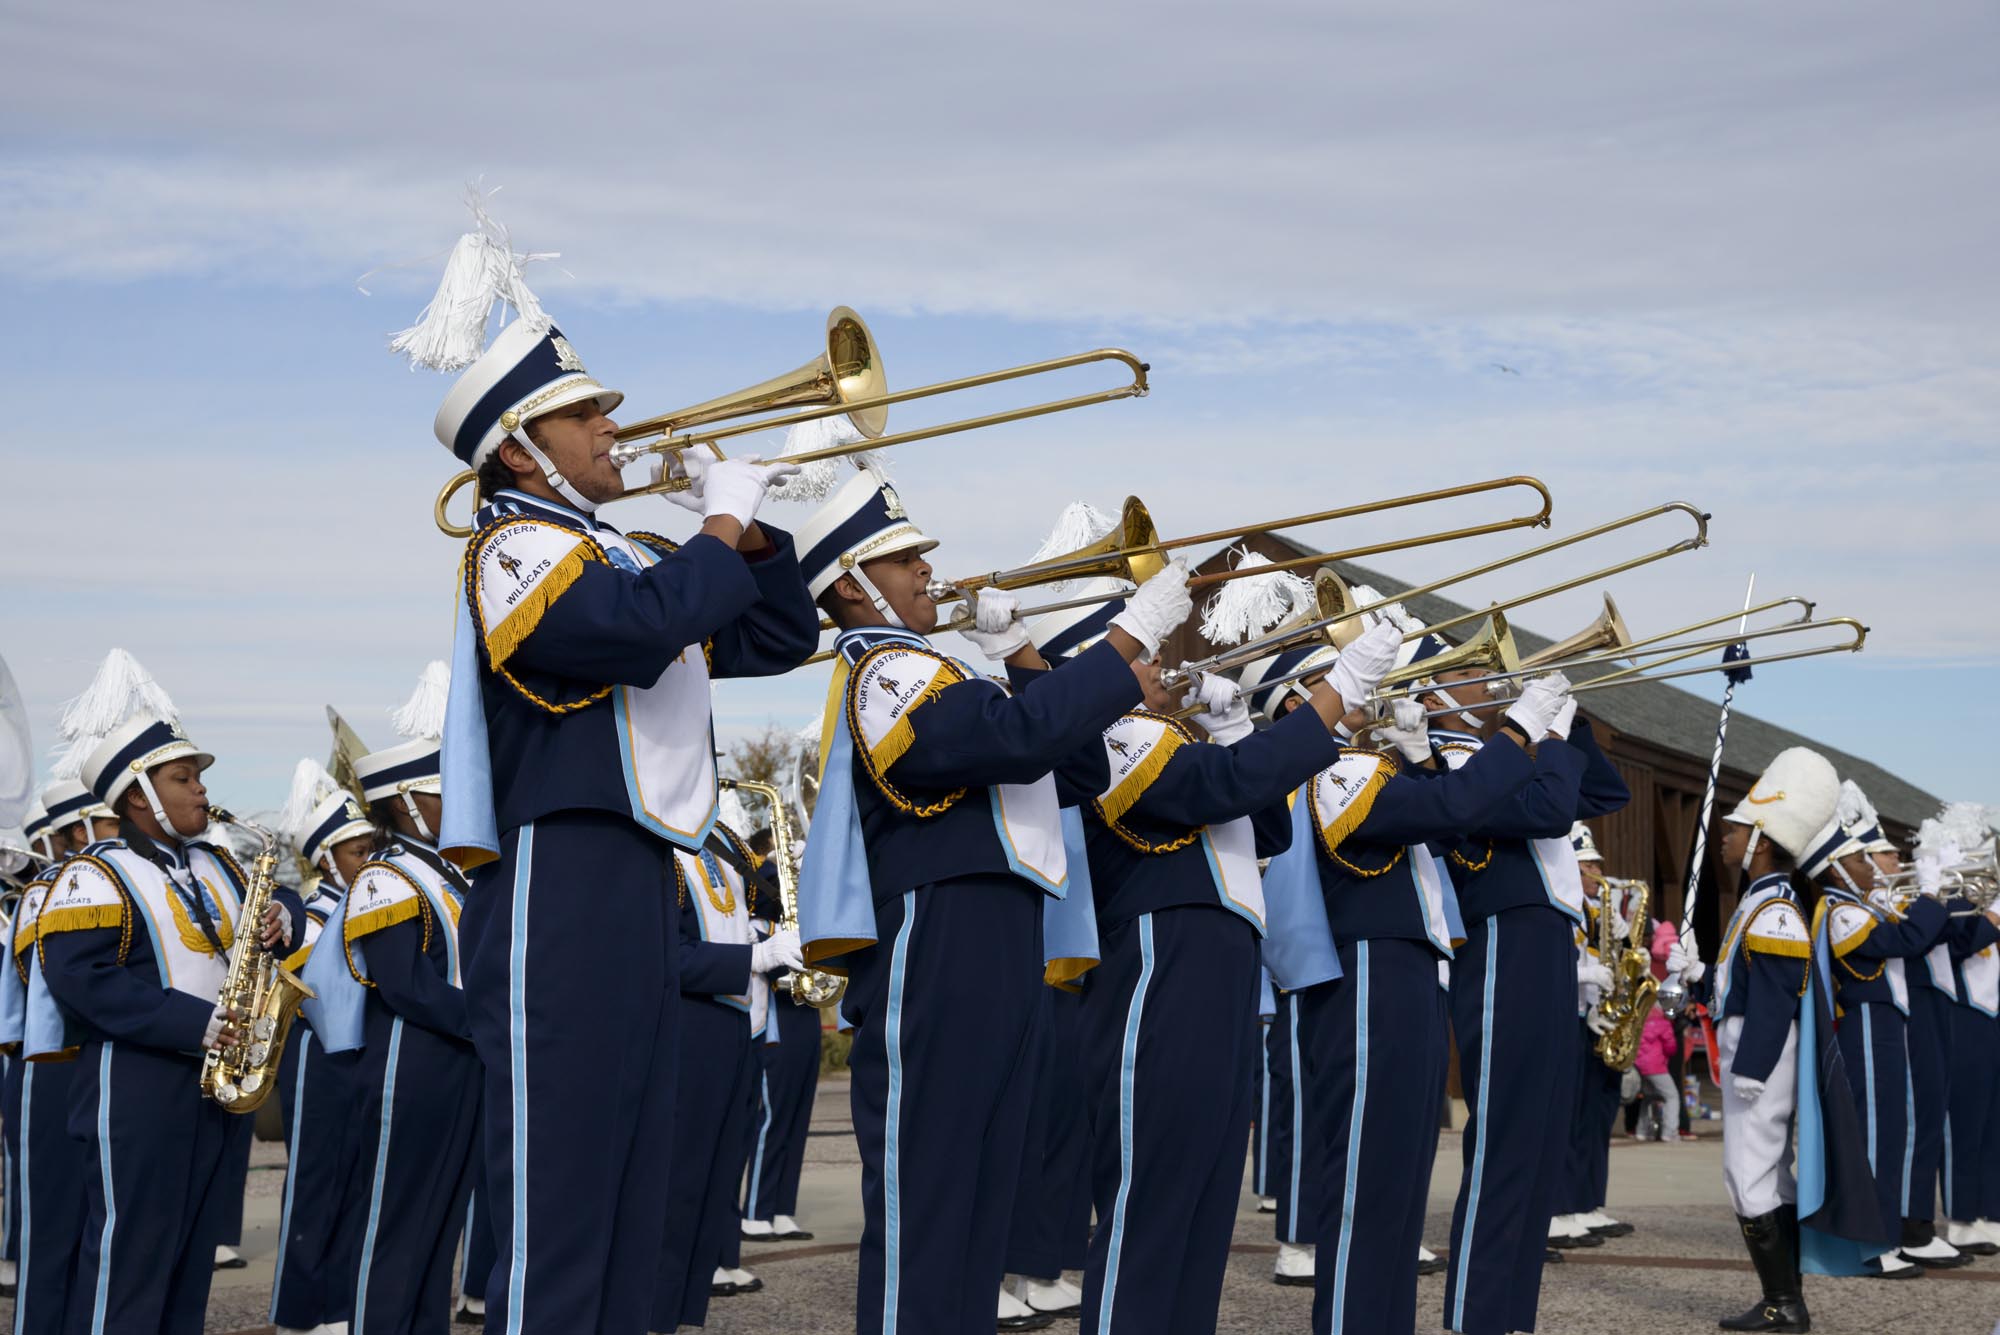 Image of the Wildcats marching band playing the trombone 